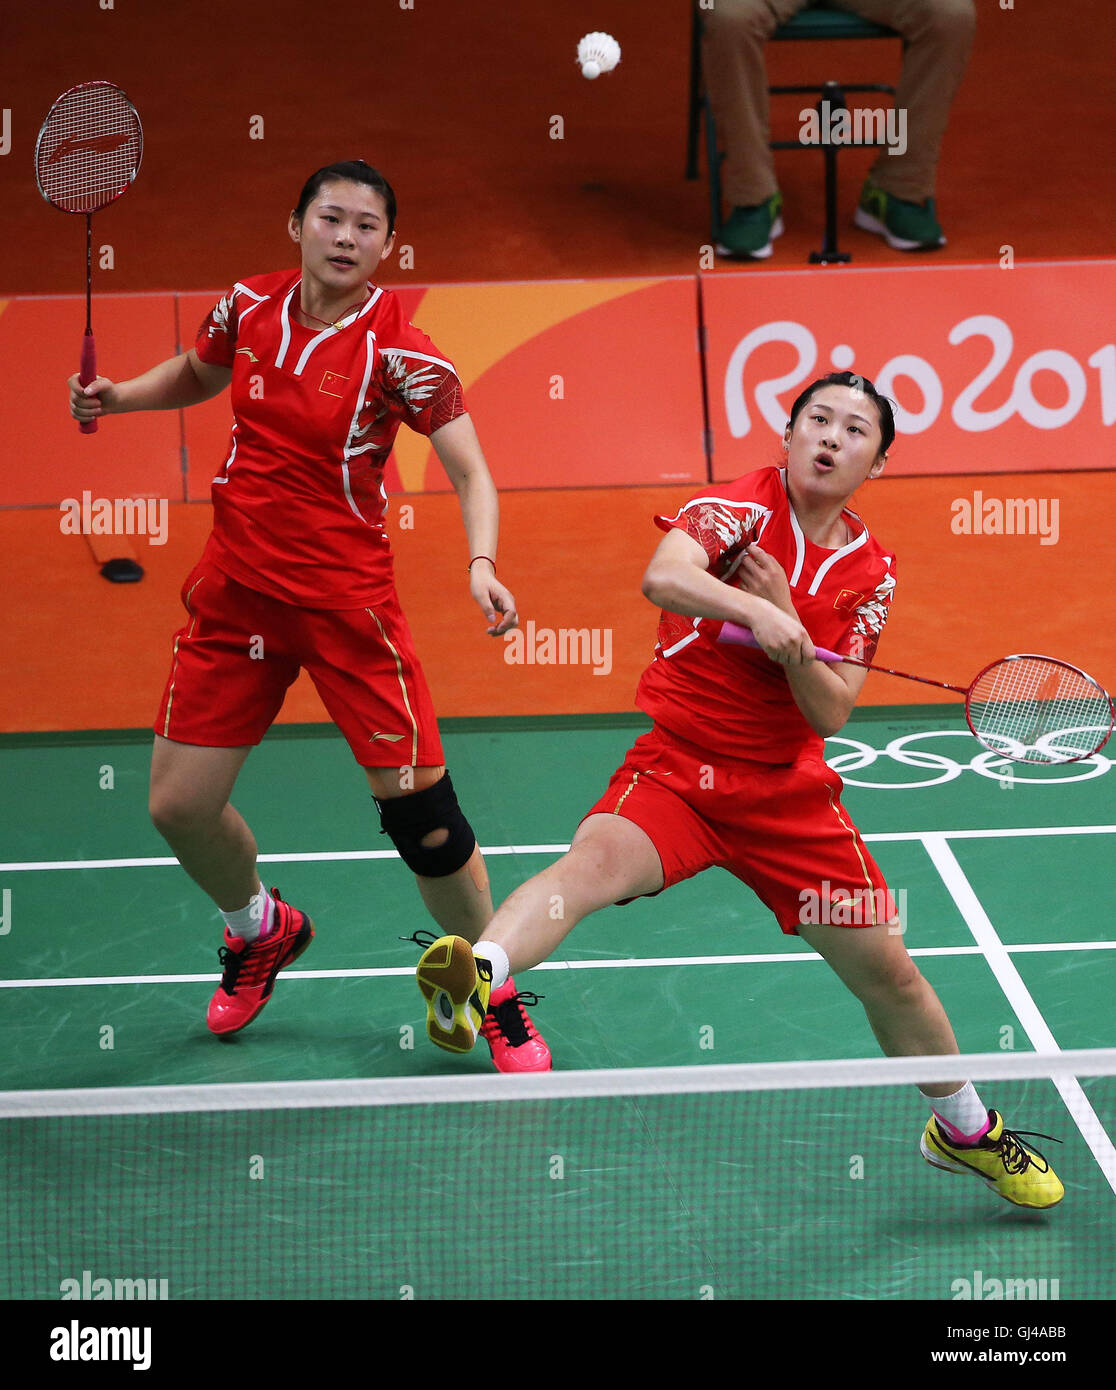 Rio De Janeiro, Brazil. 12th Aug, 2016. China's Luo Ying and Luo Yu compete against South Korea's Jung Kyung Eun and Shin Seung Chan during women's doubles group play stage match of Badminton at the 2016 Rio Olympic Games in Rio de Janeiro, Brazil, on Aug. 12, 2016. Jung Kyung Eun and Shin Seung Chan won the match 2-0. Credit:  Qin Lang/Xinhua/Alamy Live News Stock Photo